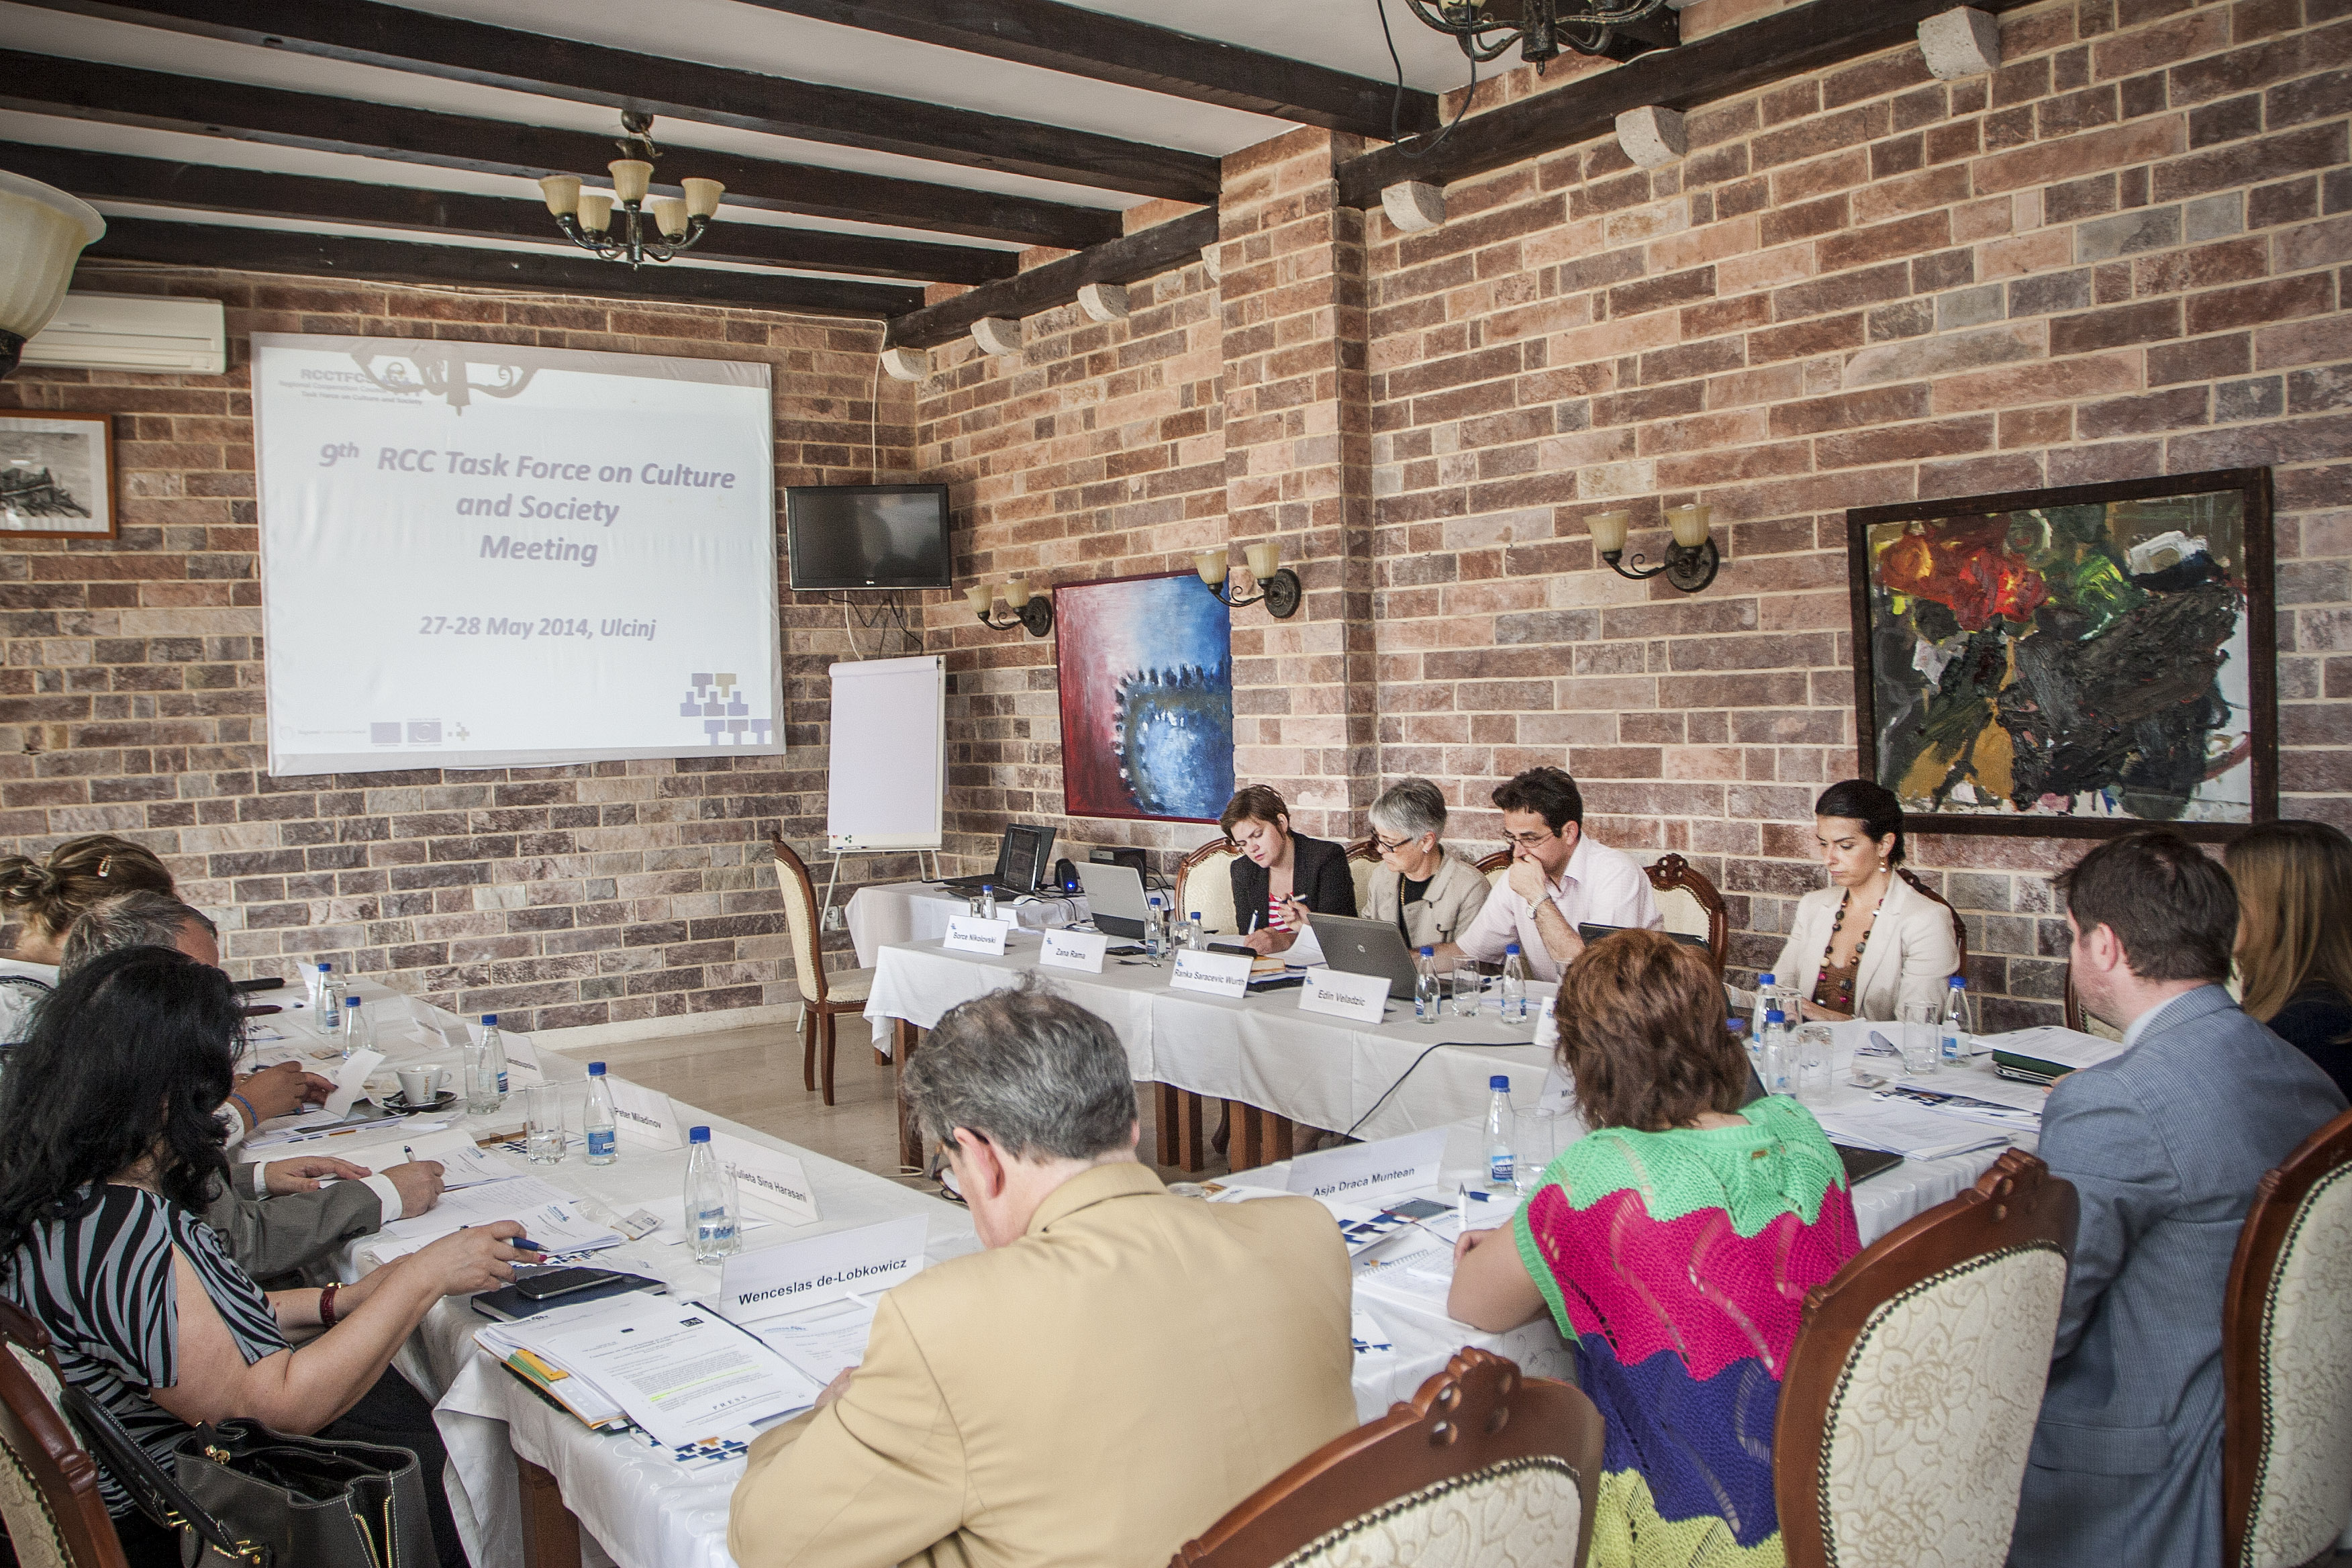 The ninth meeting of the RCC Task Force on Culture and Society was held on 28 May 2014 in Ulcinj, Montenegro. (Photo RCC/Milena Filipovic)